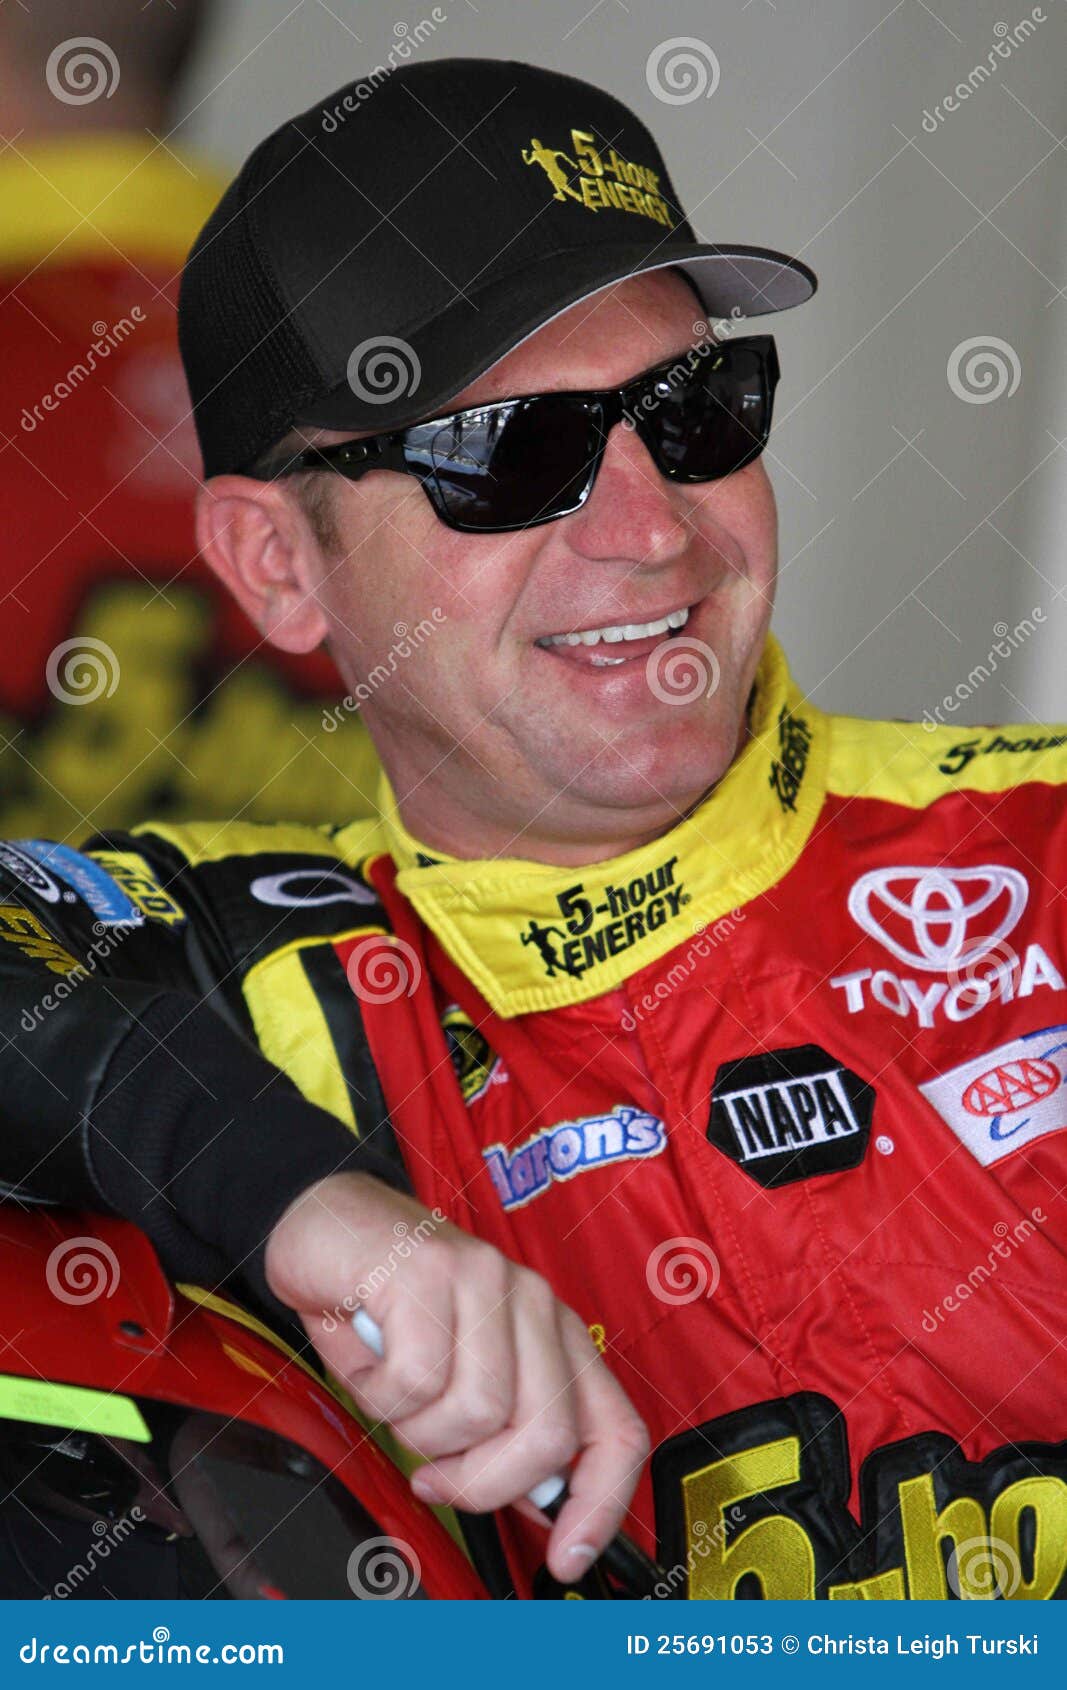 Clint Bowyer editorial stock photo. Image of racing, michael - 25691053